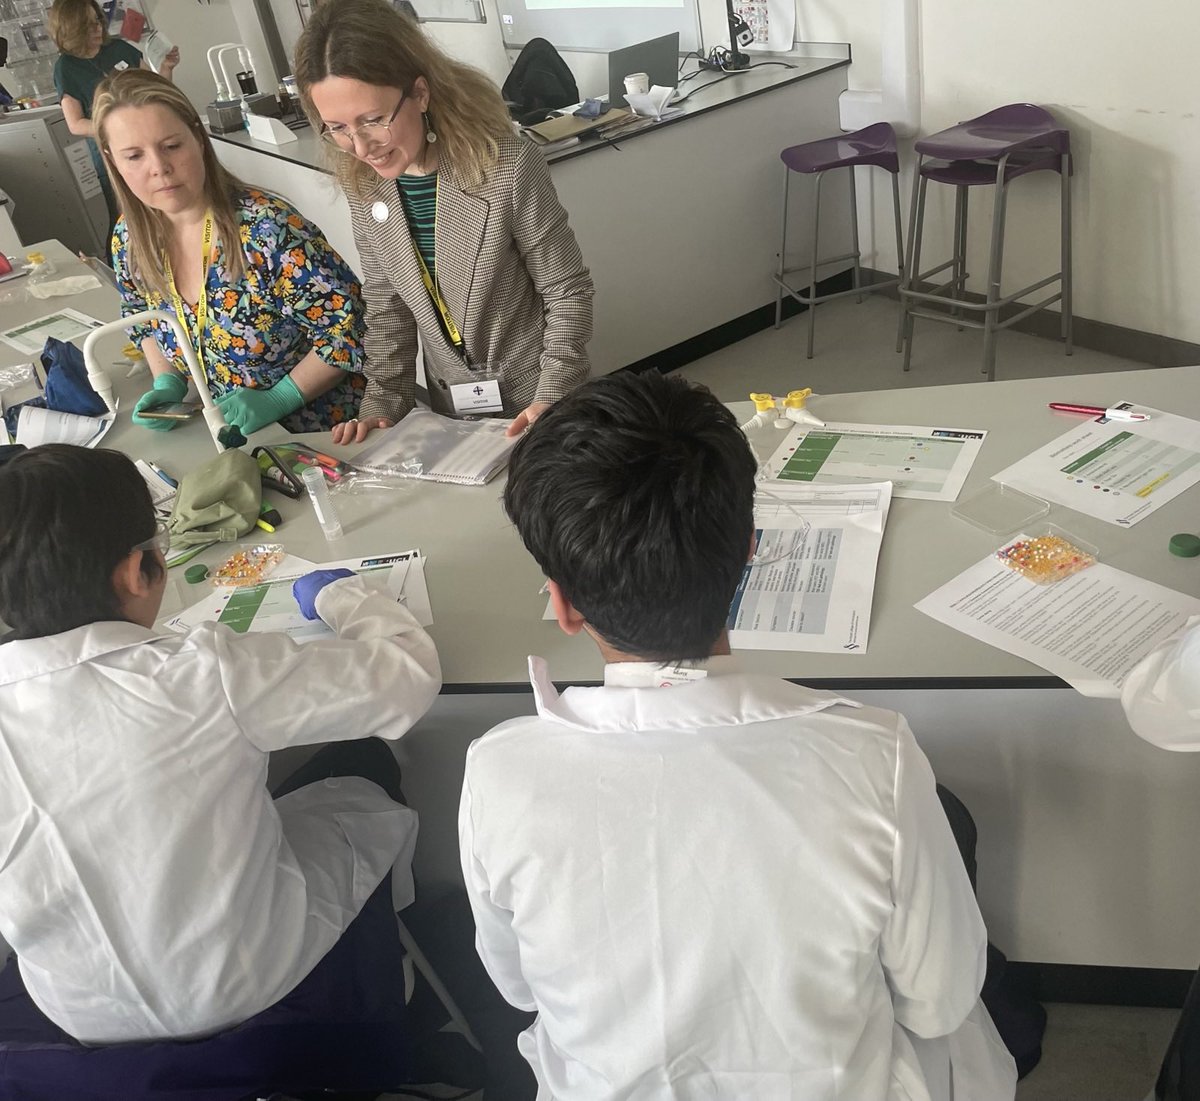 🧠🔬 #ScienceEd The Mindtrack workshop by MRC Prion Unit @UCL supported by @RCPath introduced Year 7-9 students to dementia and prion disease. They explored biomarkers, donned lab coats, and diagnosed “patients” using mock CSF samples filled with colourful sugar pearls.